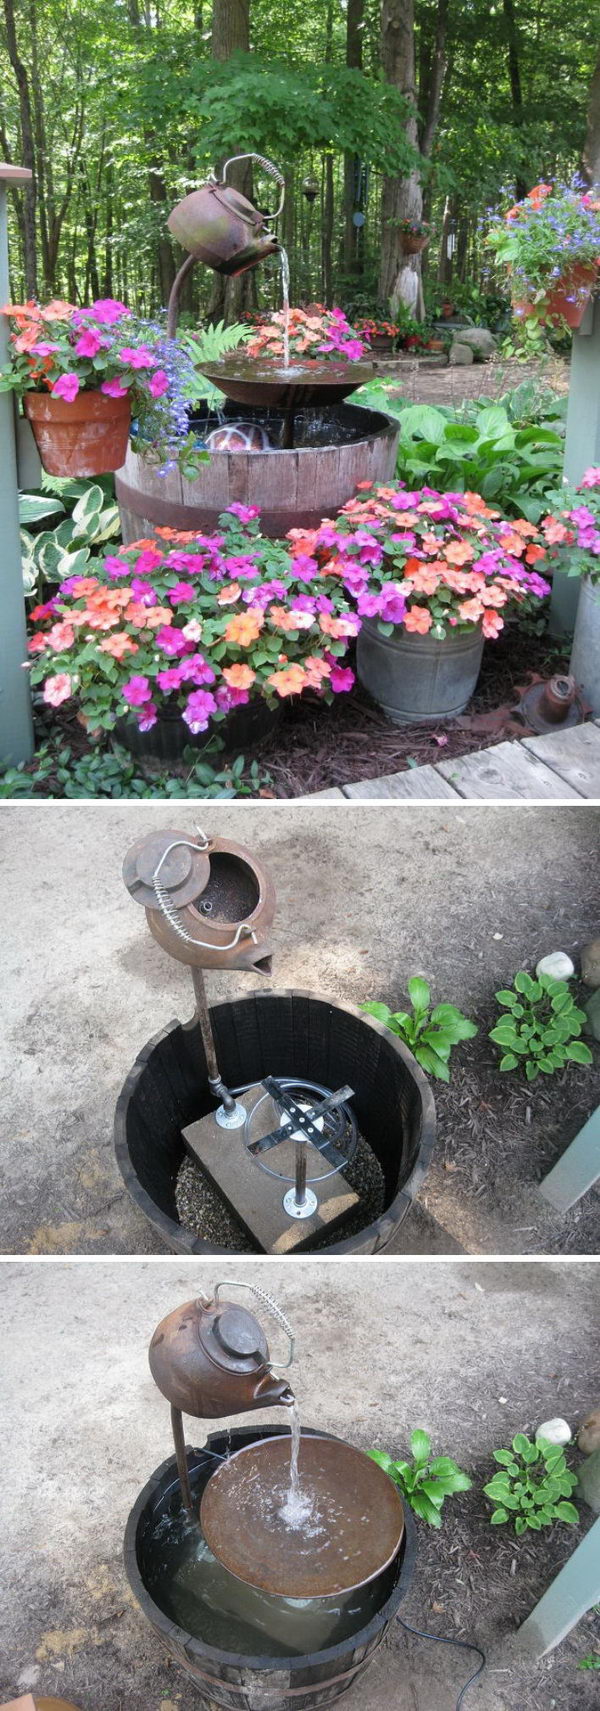 30+ Fun and Whimsical DIY Garden Projects Hative